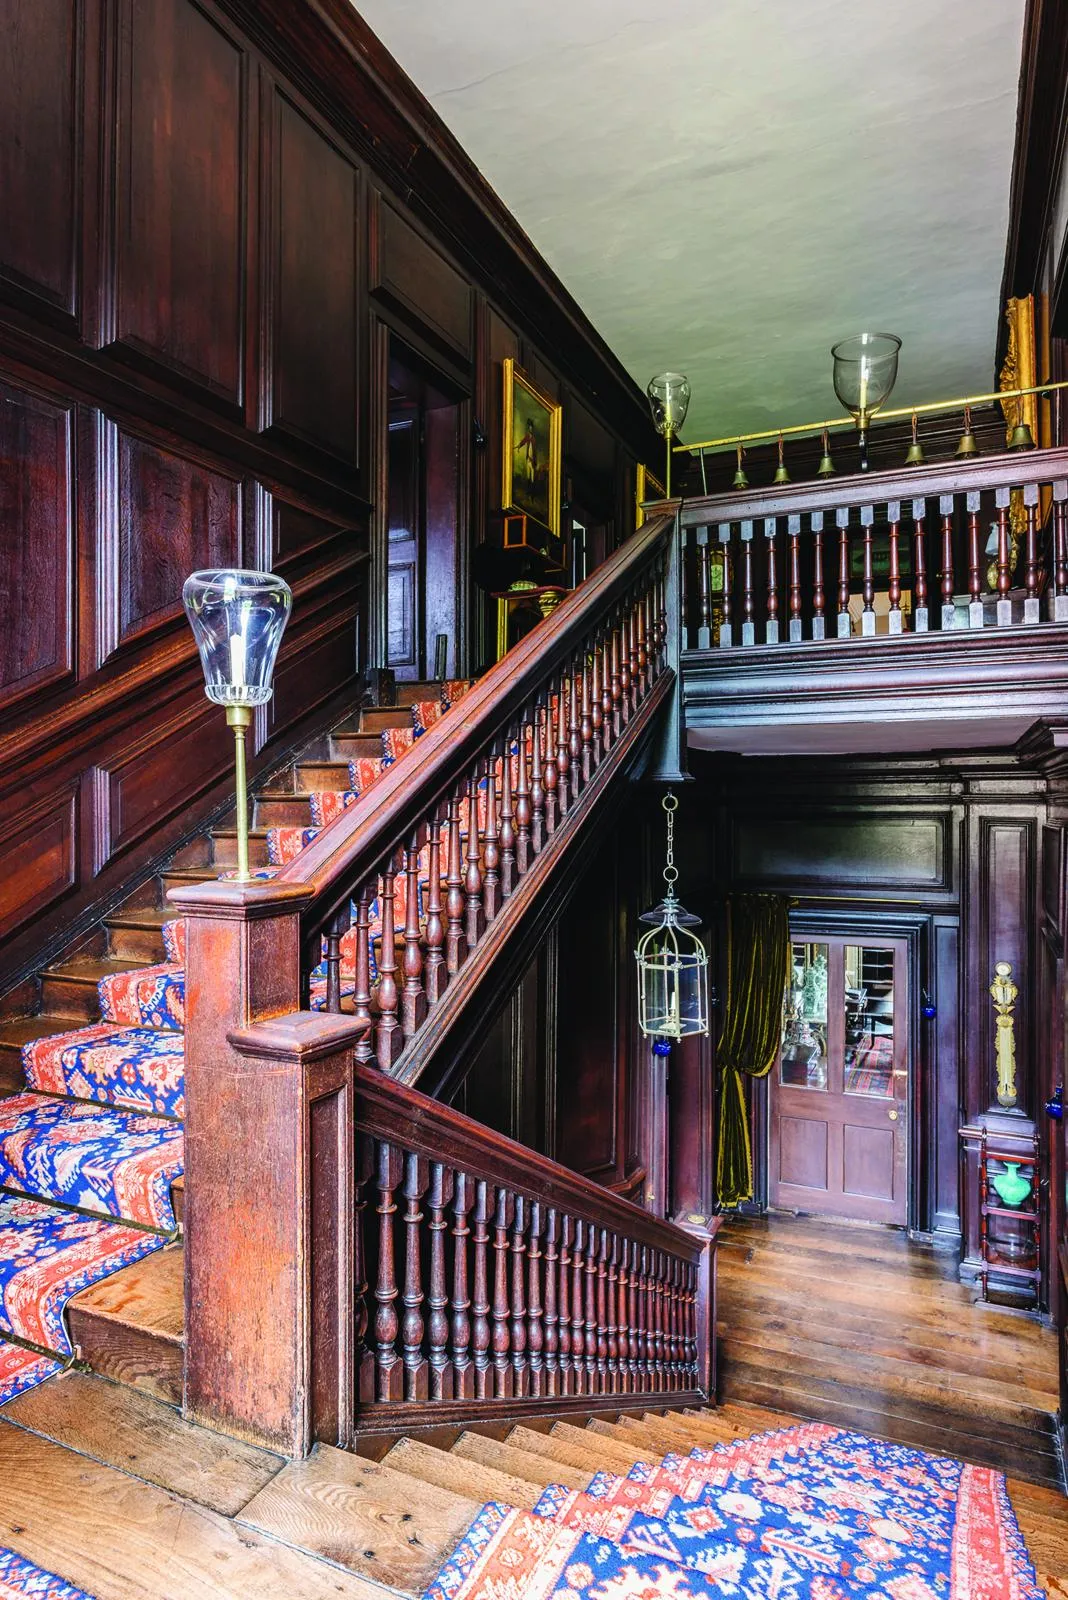 Historic Erddig, the staircase